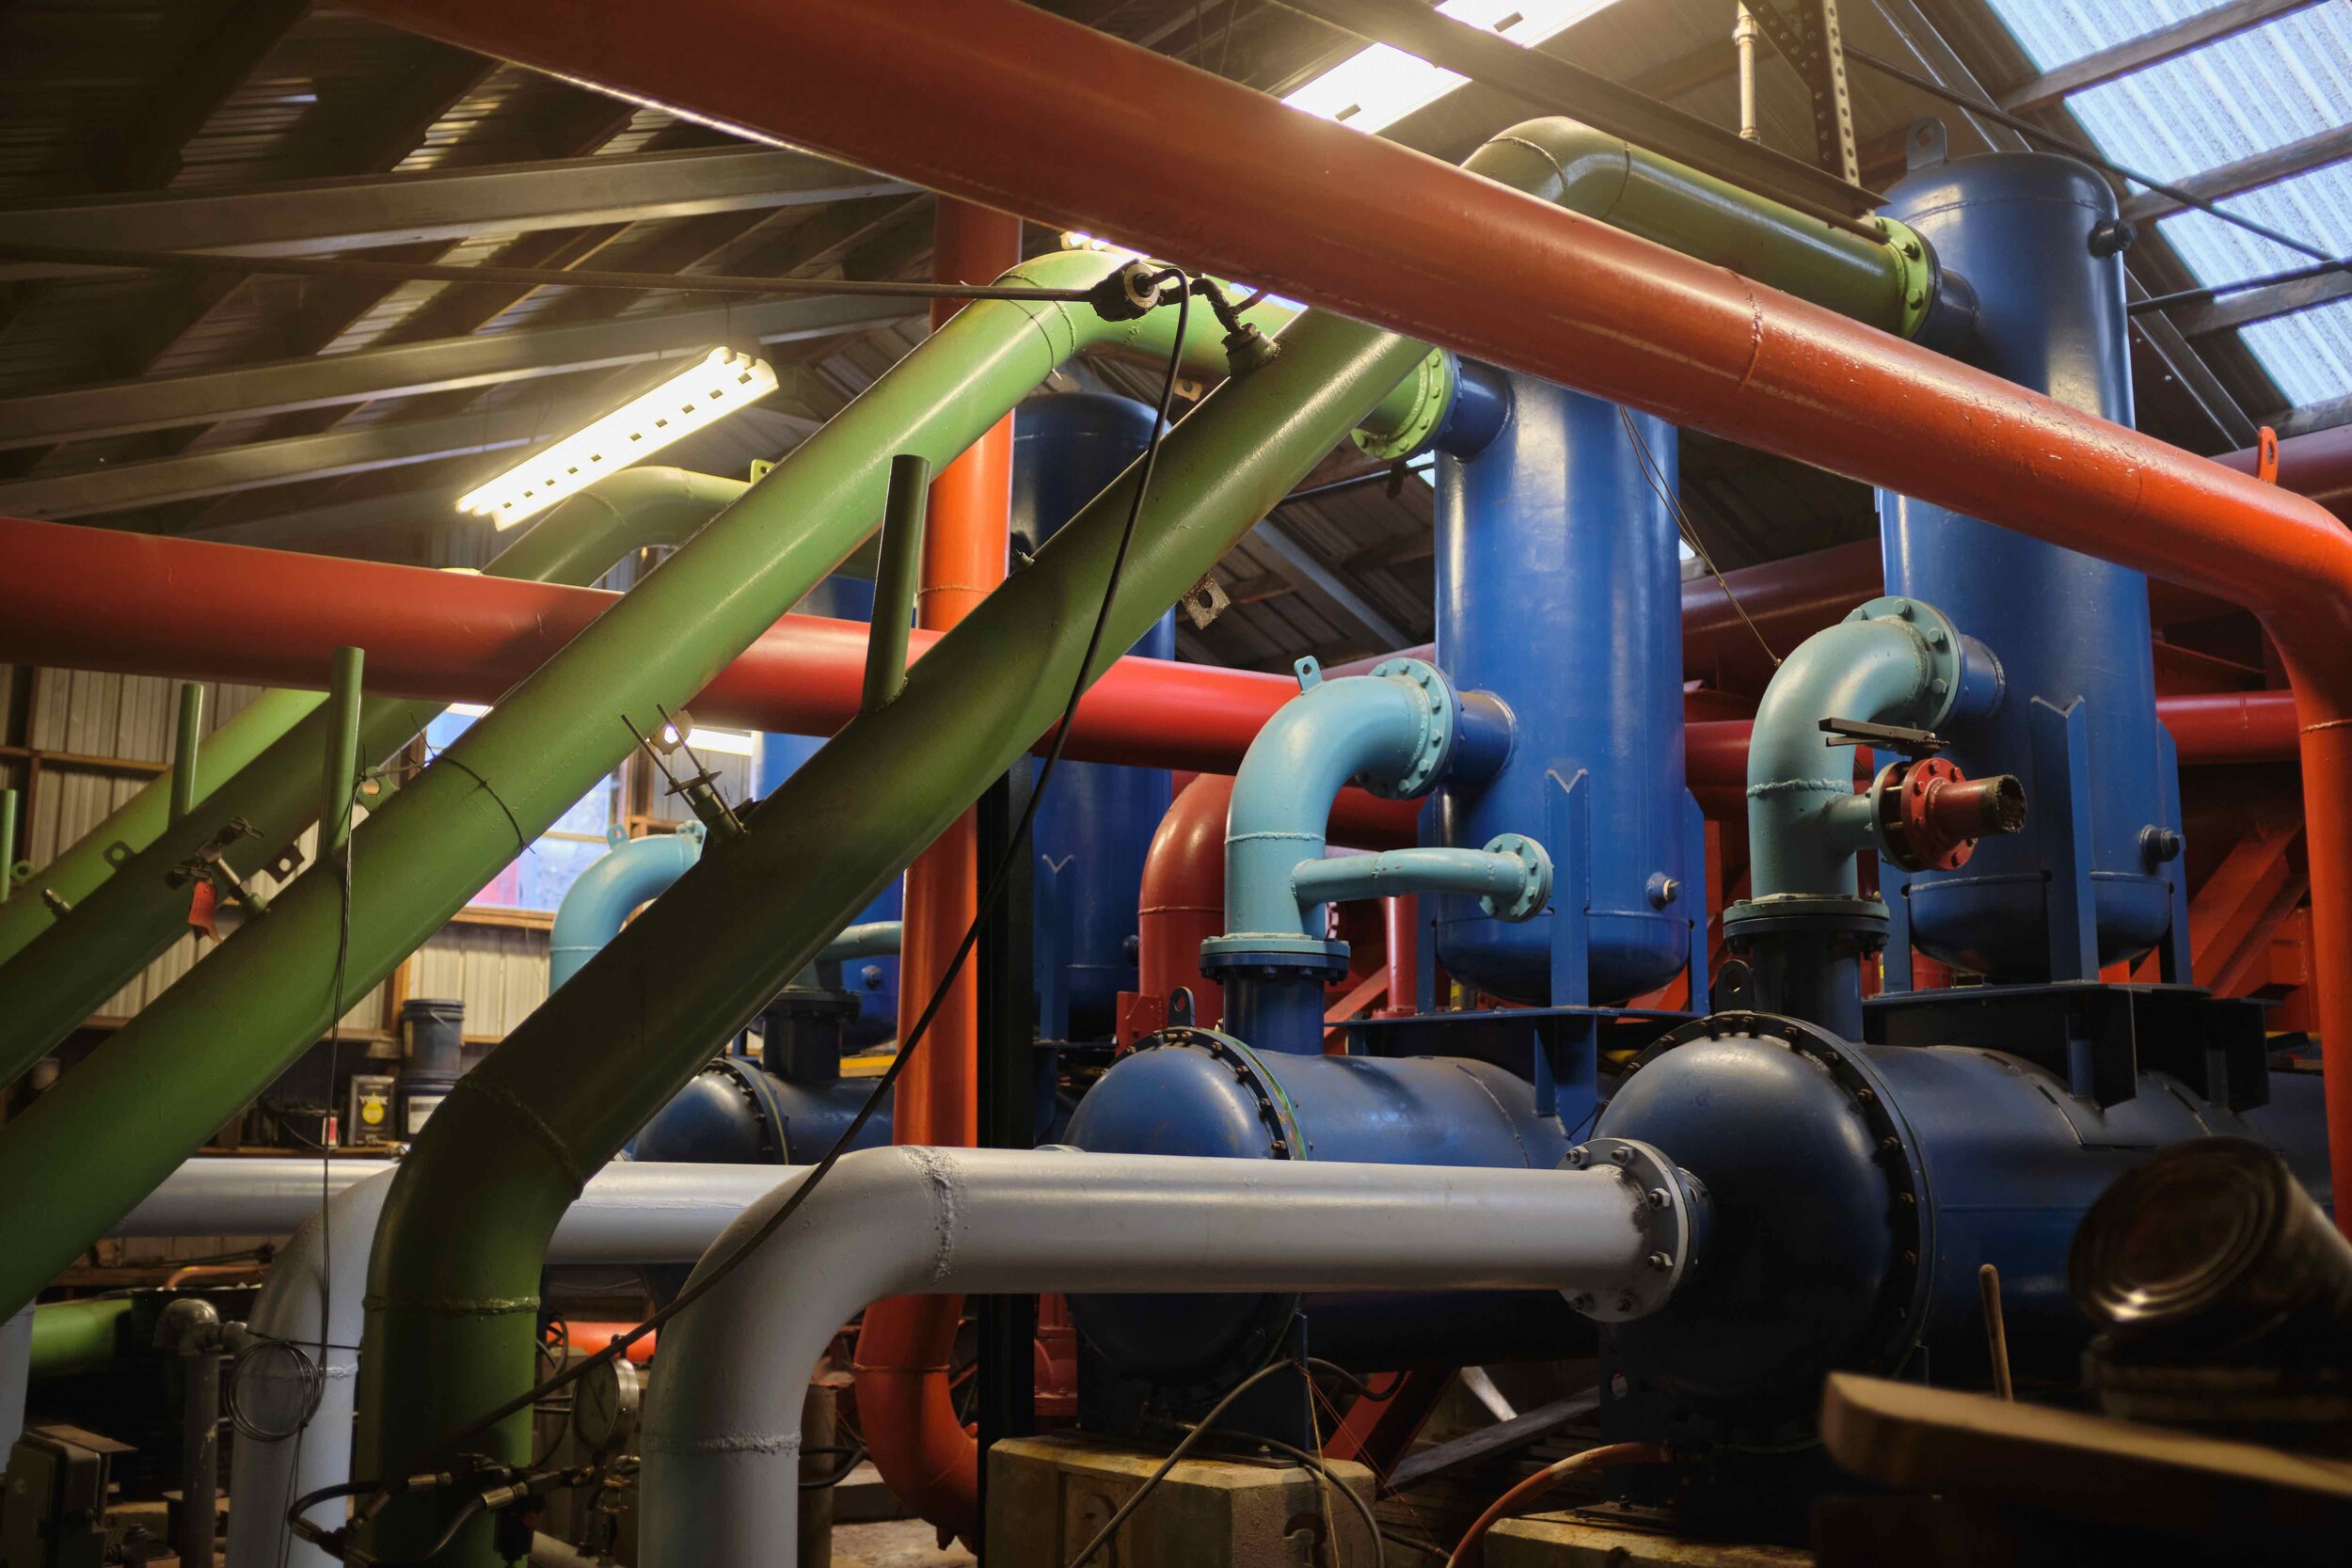  This menagerie of colorful pipes is all that keeps the hot air coming out of Hunter’s compressors from undermining the whole snowmaking operation. Large chambers take compressed air and cool it using vortices and heat exchangers. 